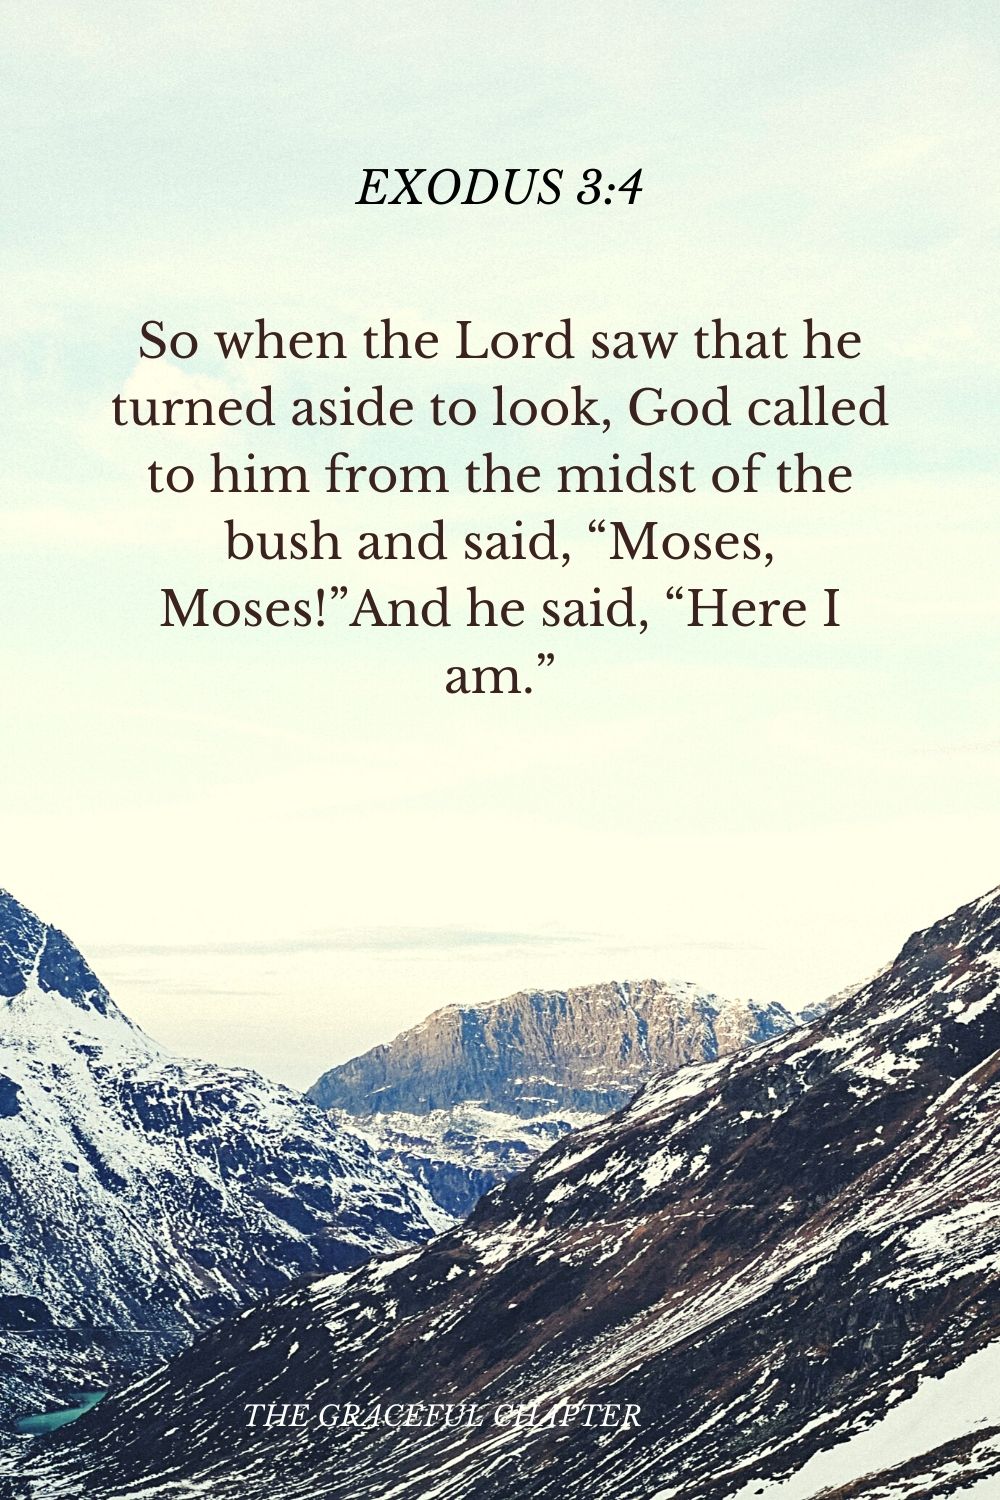 So when the Lord saw that he turned aside to look, God called to him from the midst of the bush and said, “Moses, Moses!”And he said, “Here I am.”So when the Lord saw that he turned aside to look, God called to him from the midst of the bush and said, “Moses, Moses!”And he said, “Here I am.” Exodus 3:4